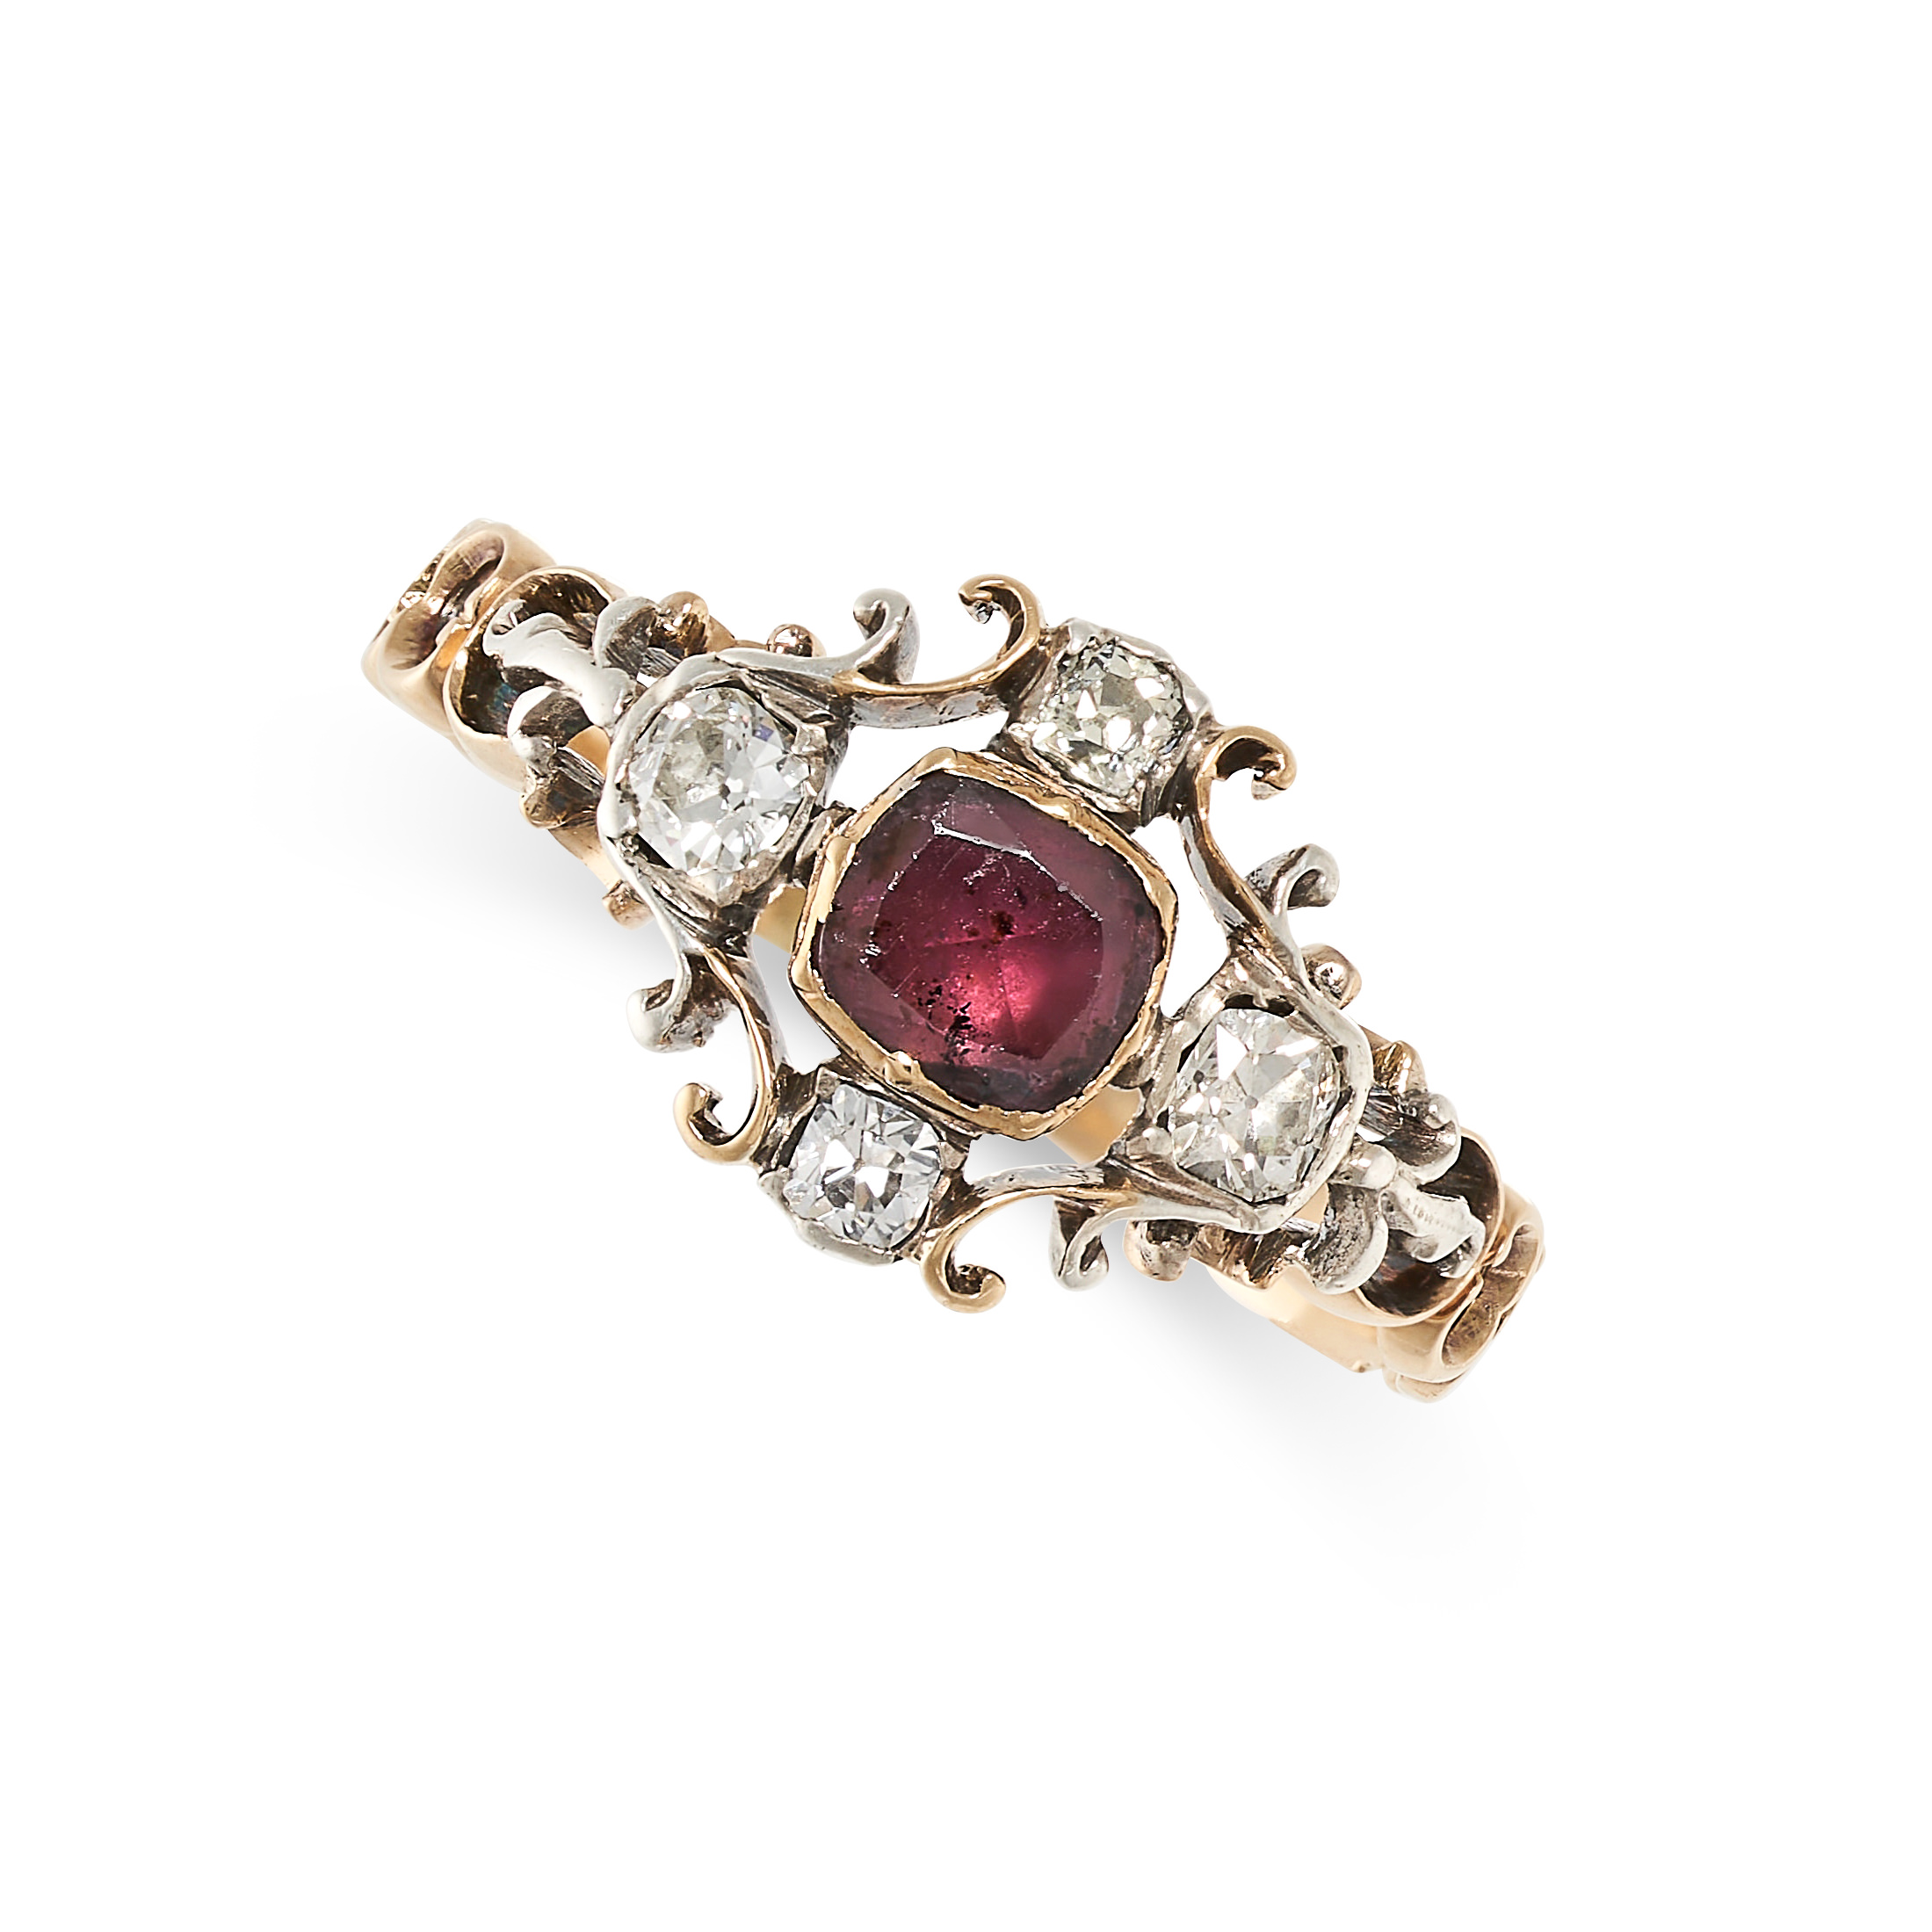 AN ANTIQUE GEORGIAN GARNET AND DIAMOND in yellow gold and silver, set with a step cut garnet